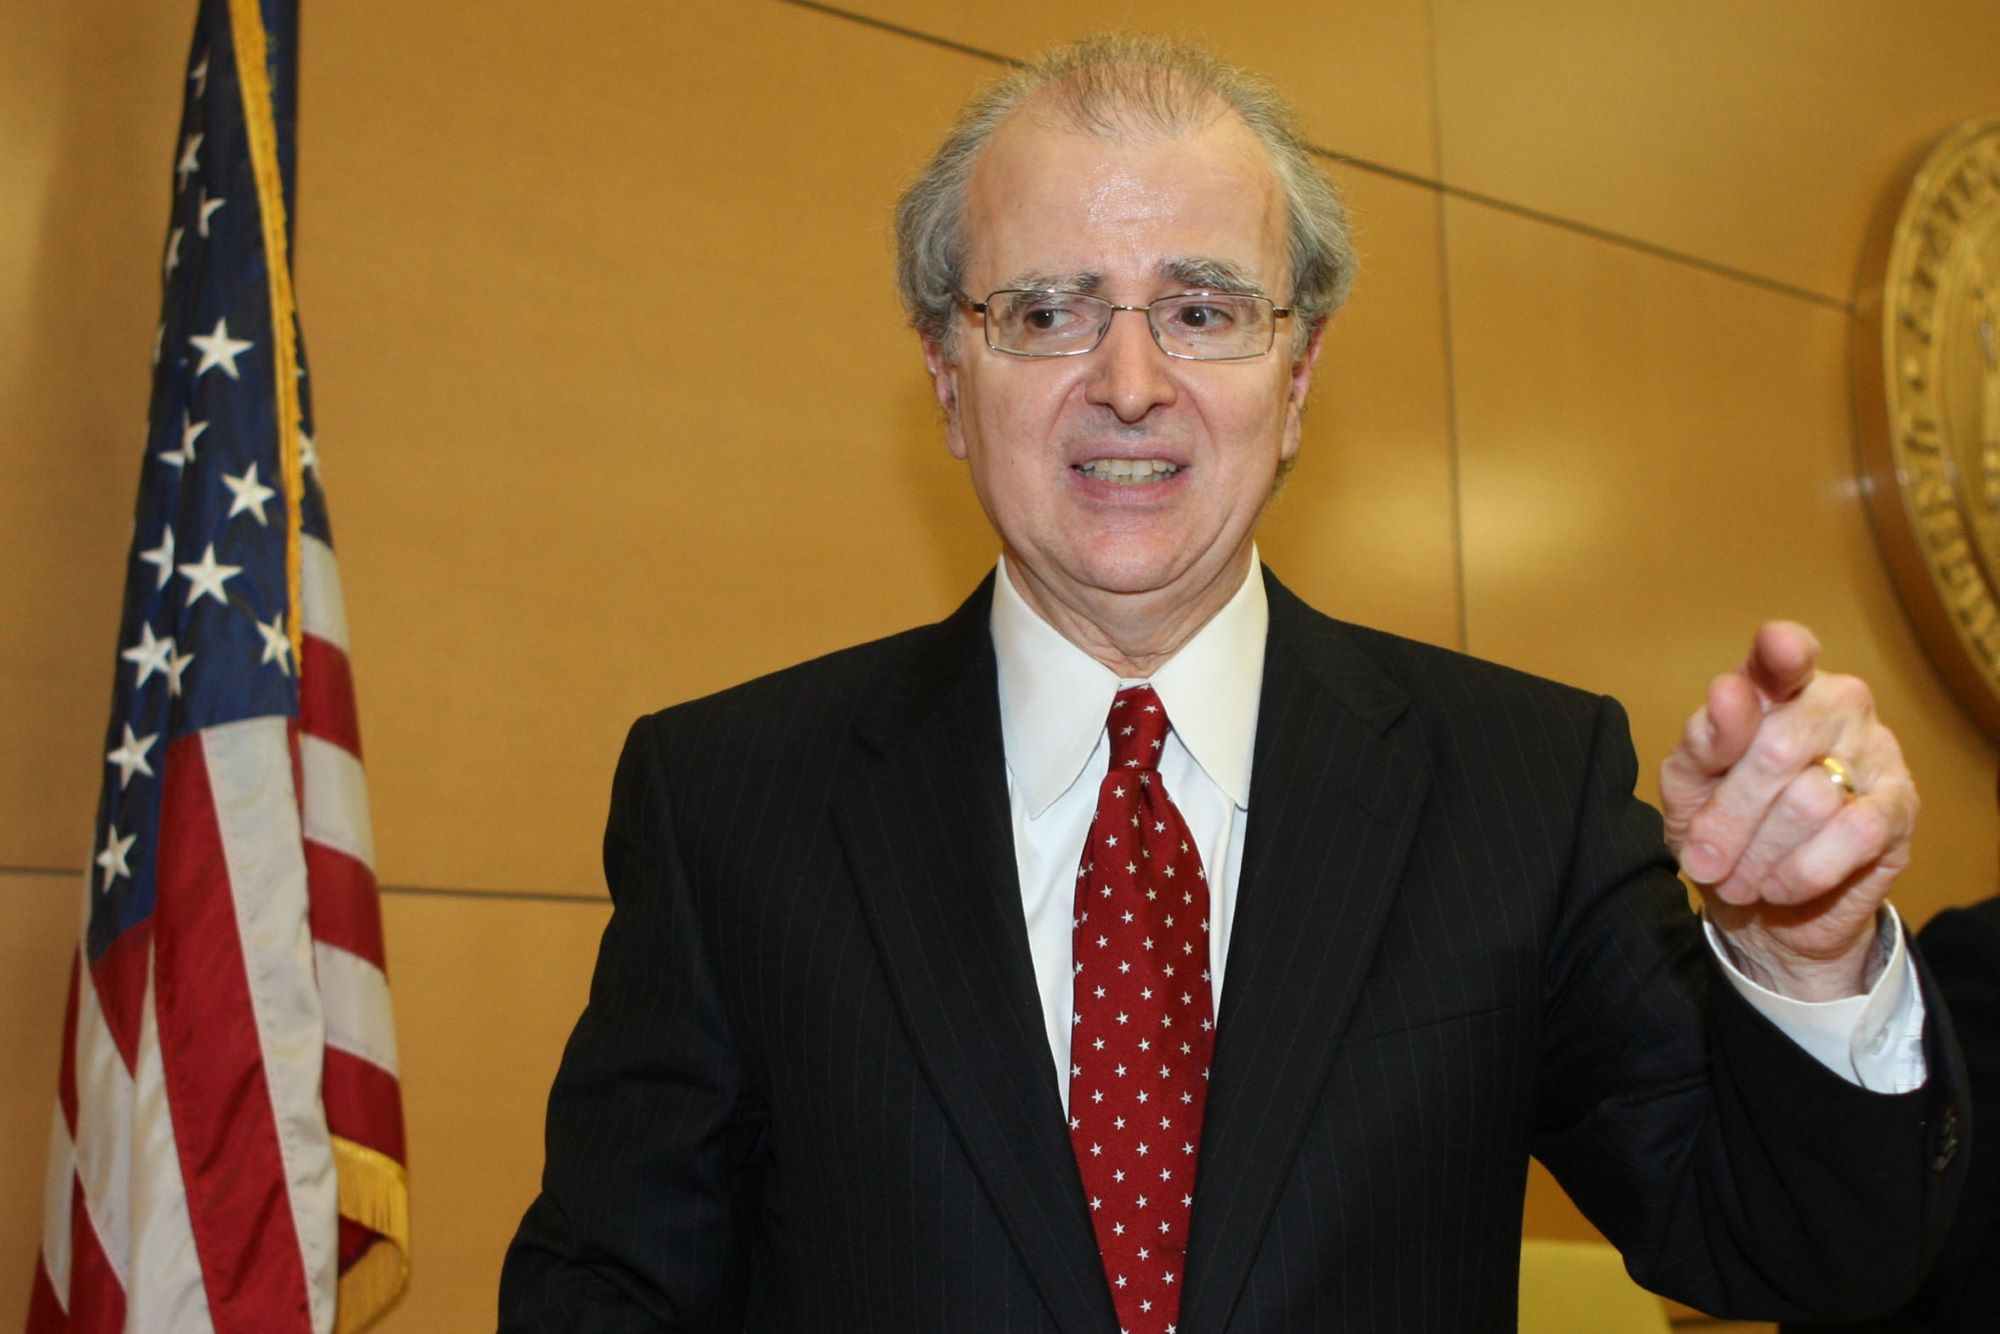 In October 2023, Gov. Kathy Hochul tapped Jonathan Lippman, former Chief Judge of the New York Court of Appeals, to review the City University of New York's policies and procedures related to antisemitism and discrimination.